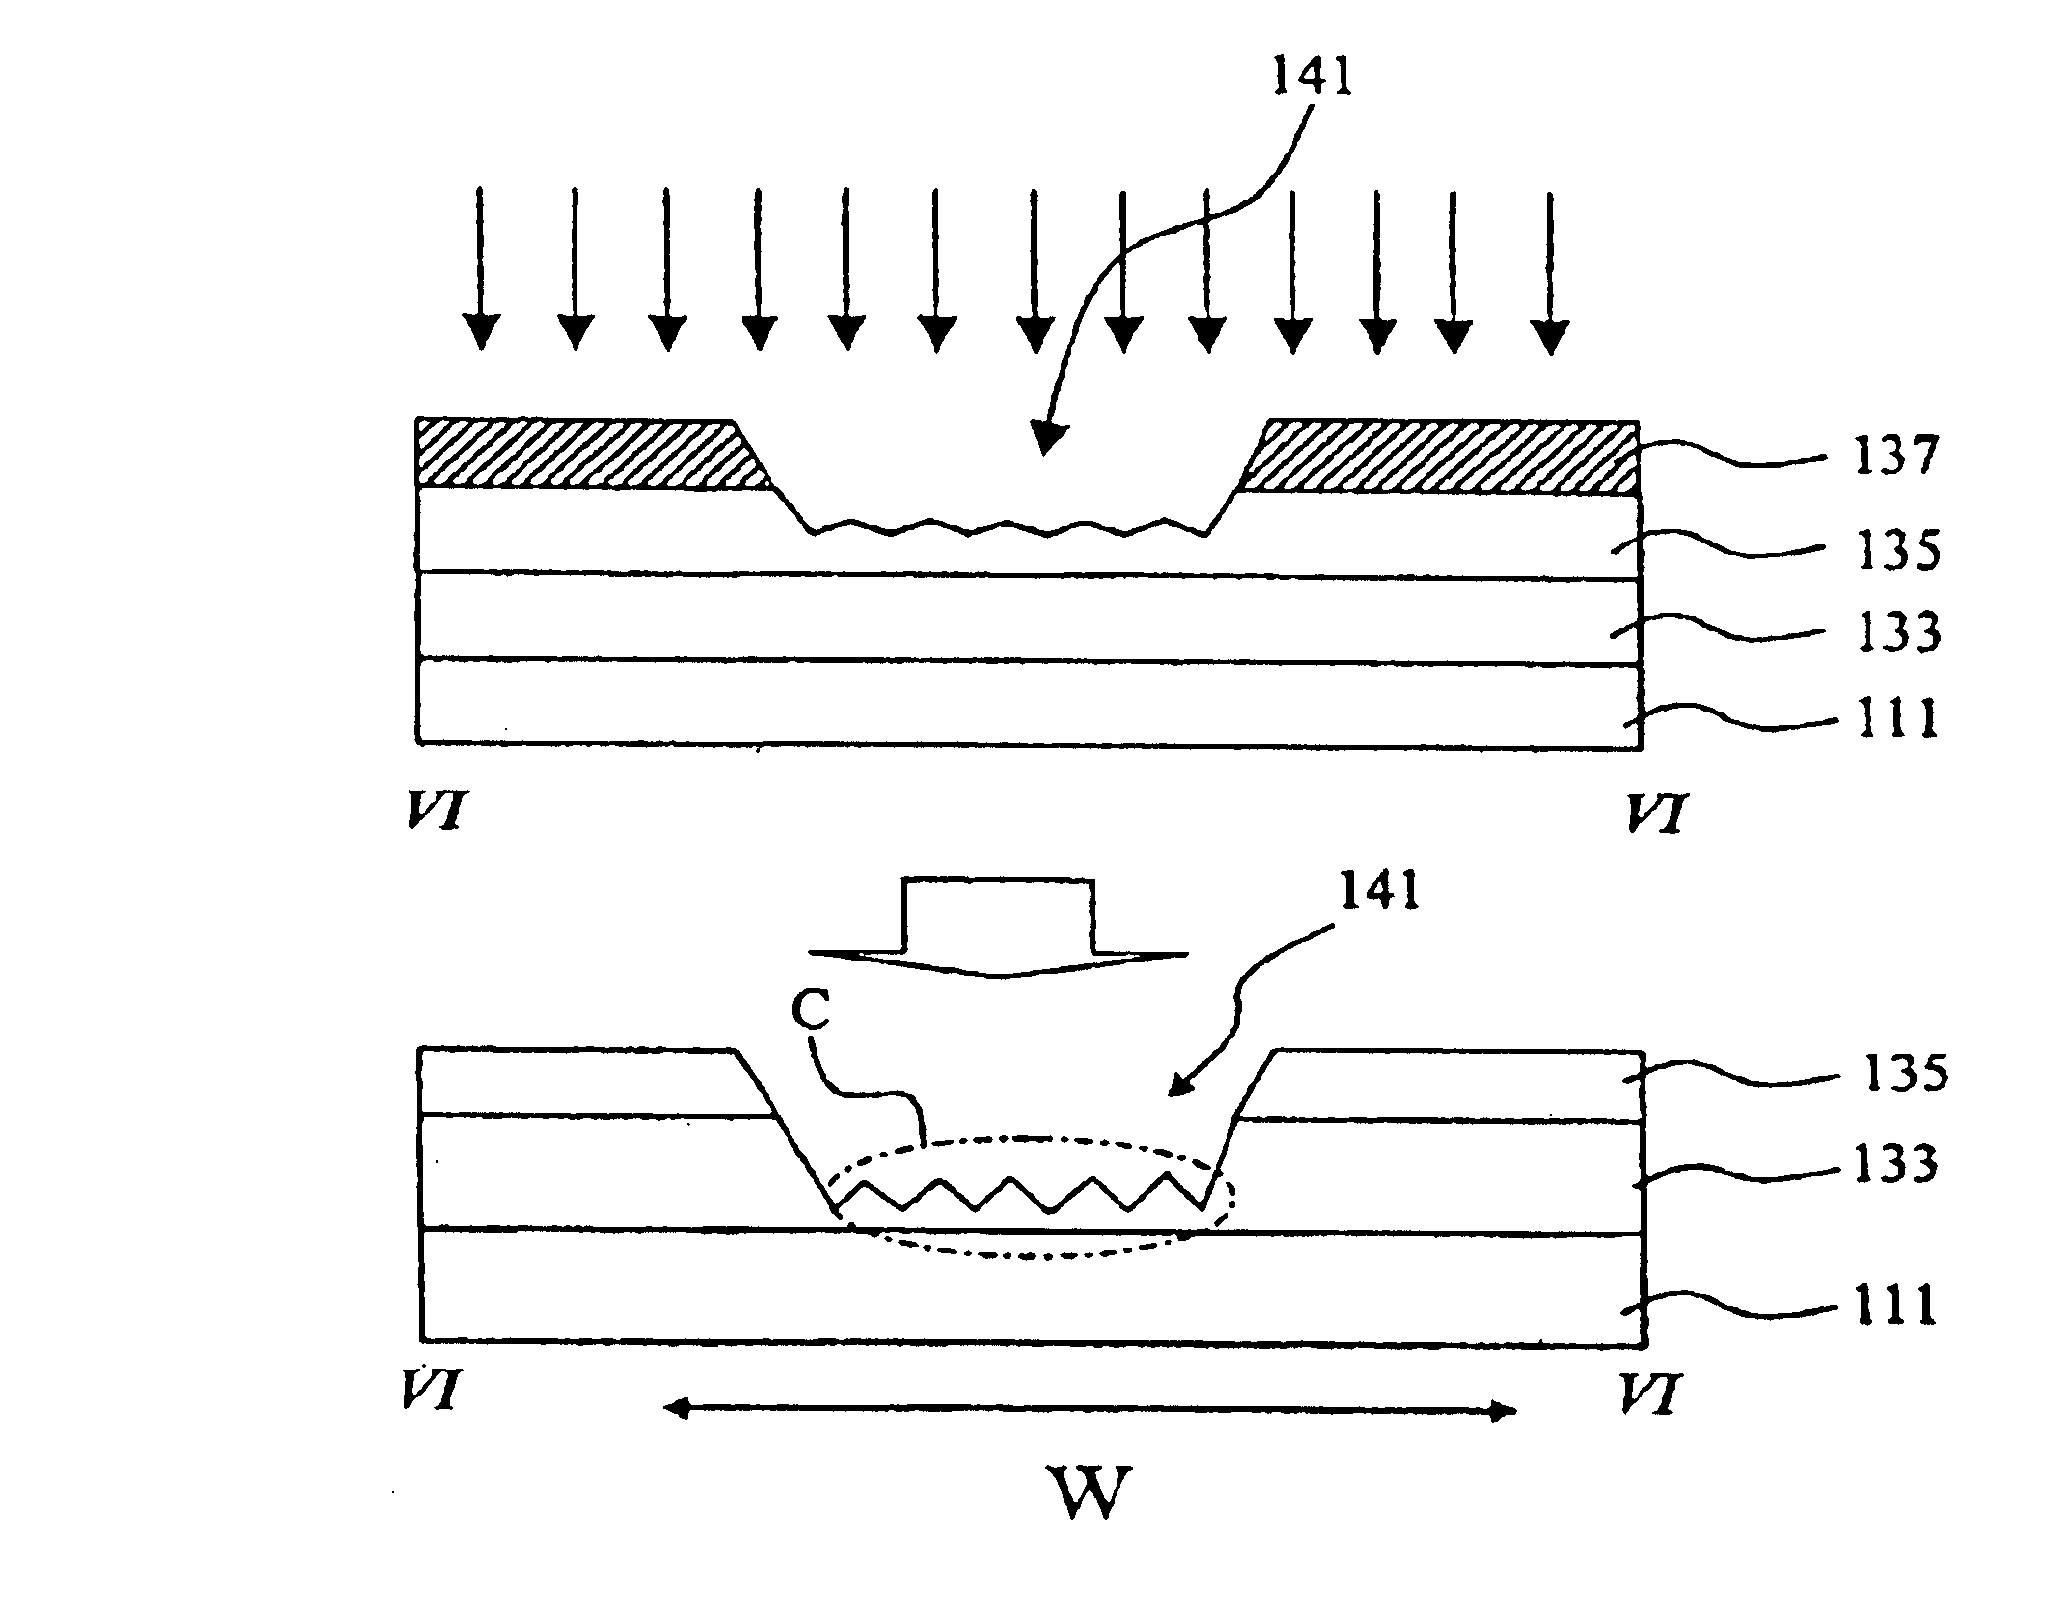 Liquid crystal display device having improved seal pattern and method of fabricating the same